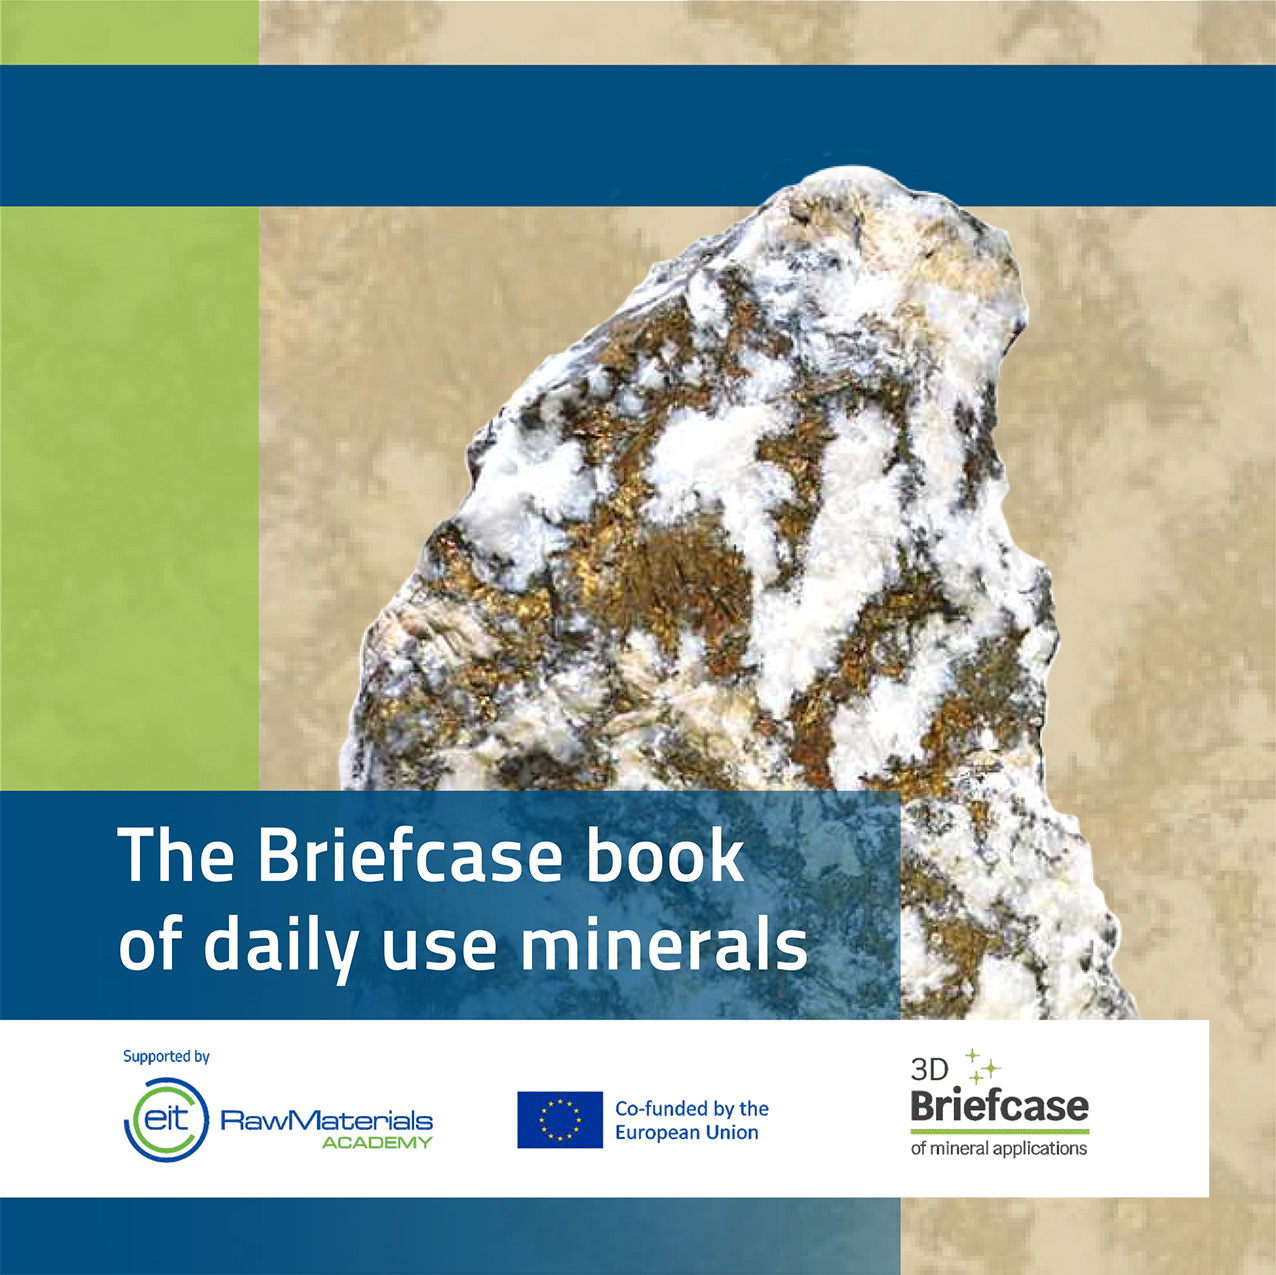 The Briefcase book of daily use minerals